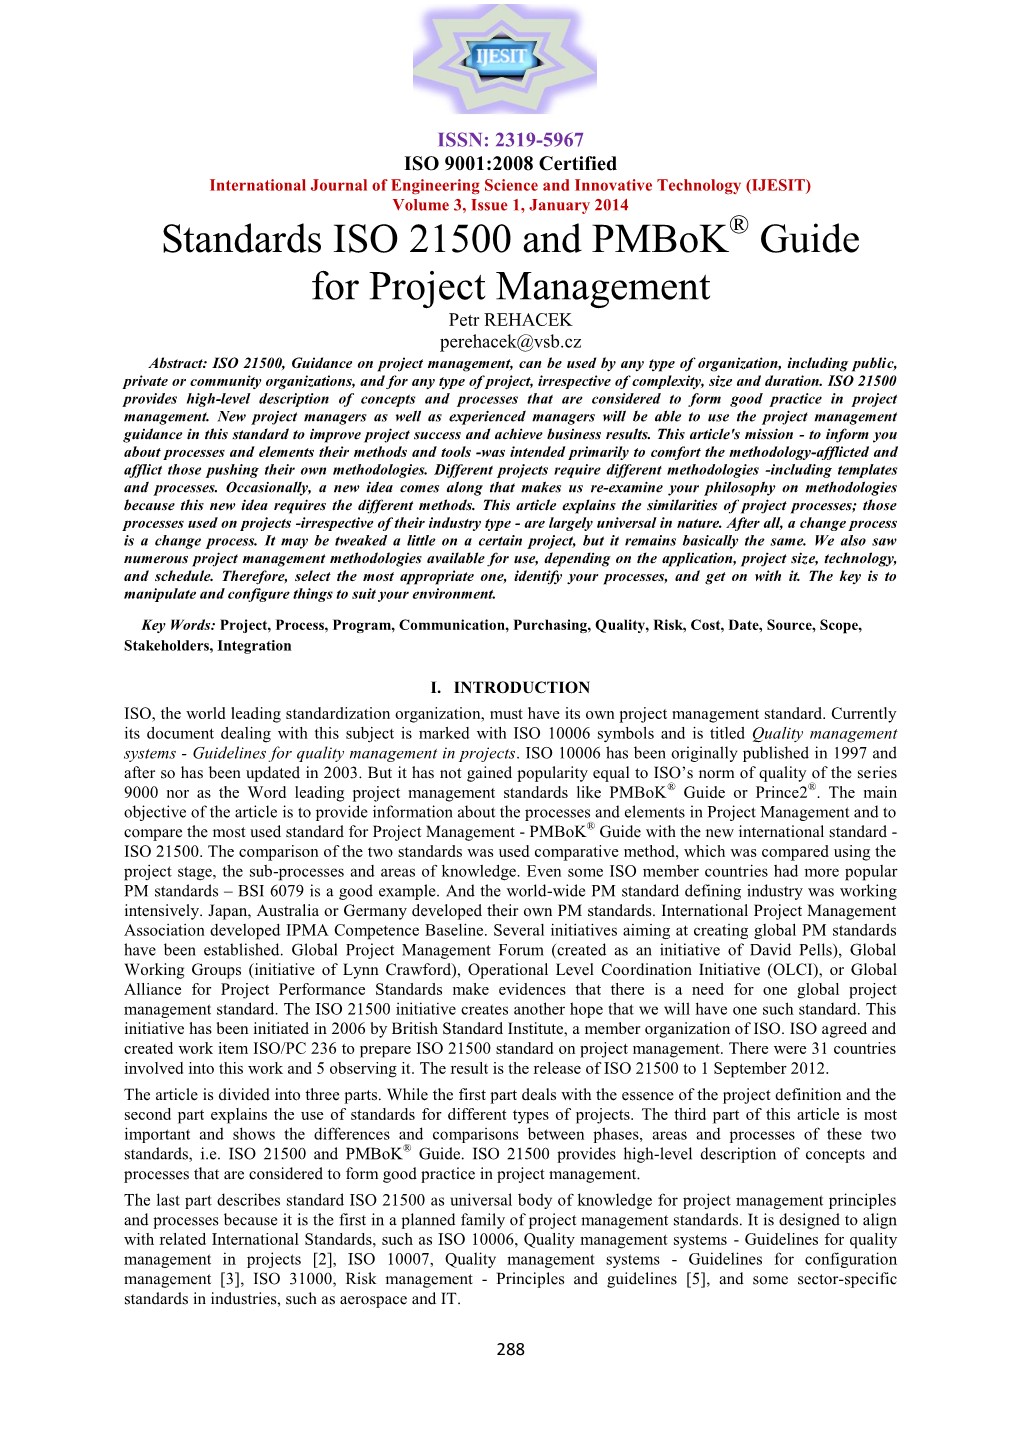 Standards ISO 21500 and Pmbok Guide for Project Management